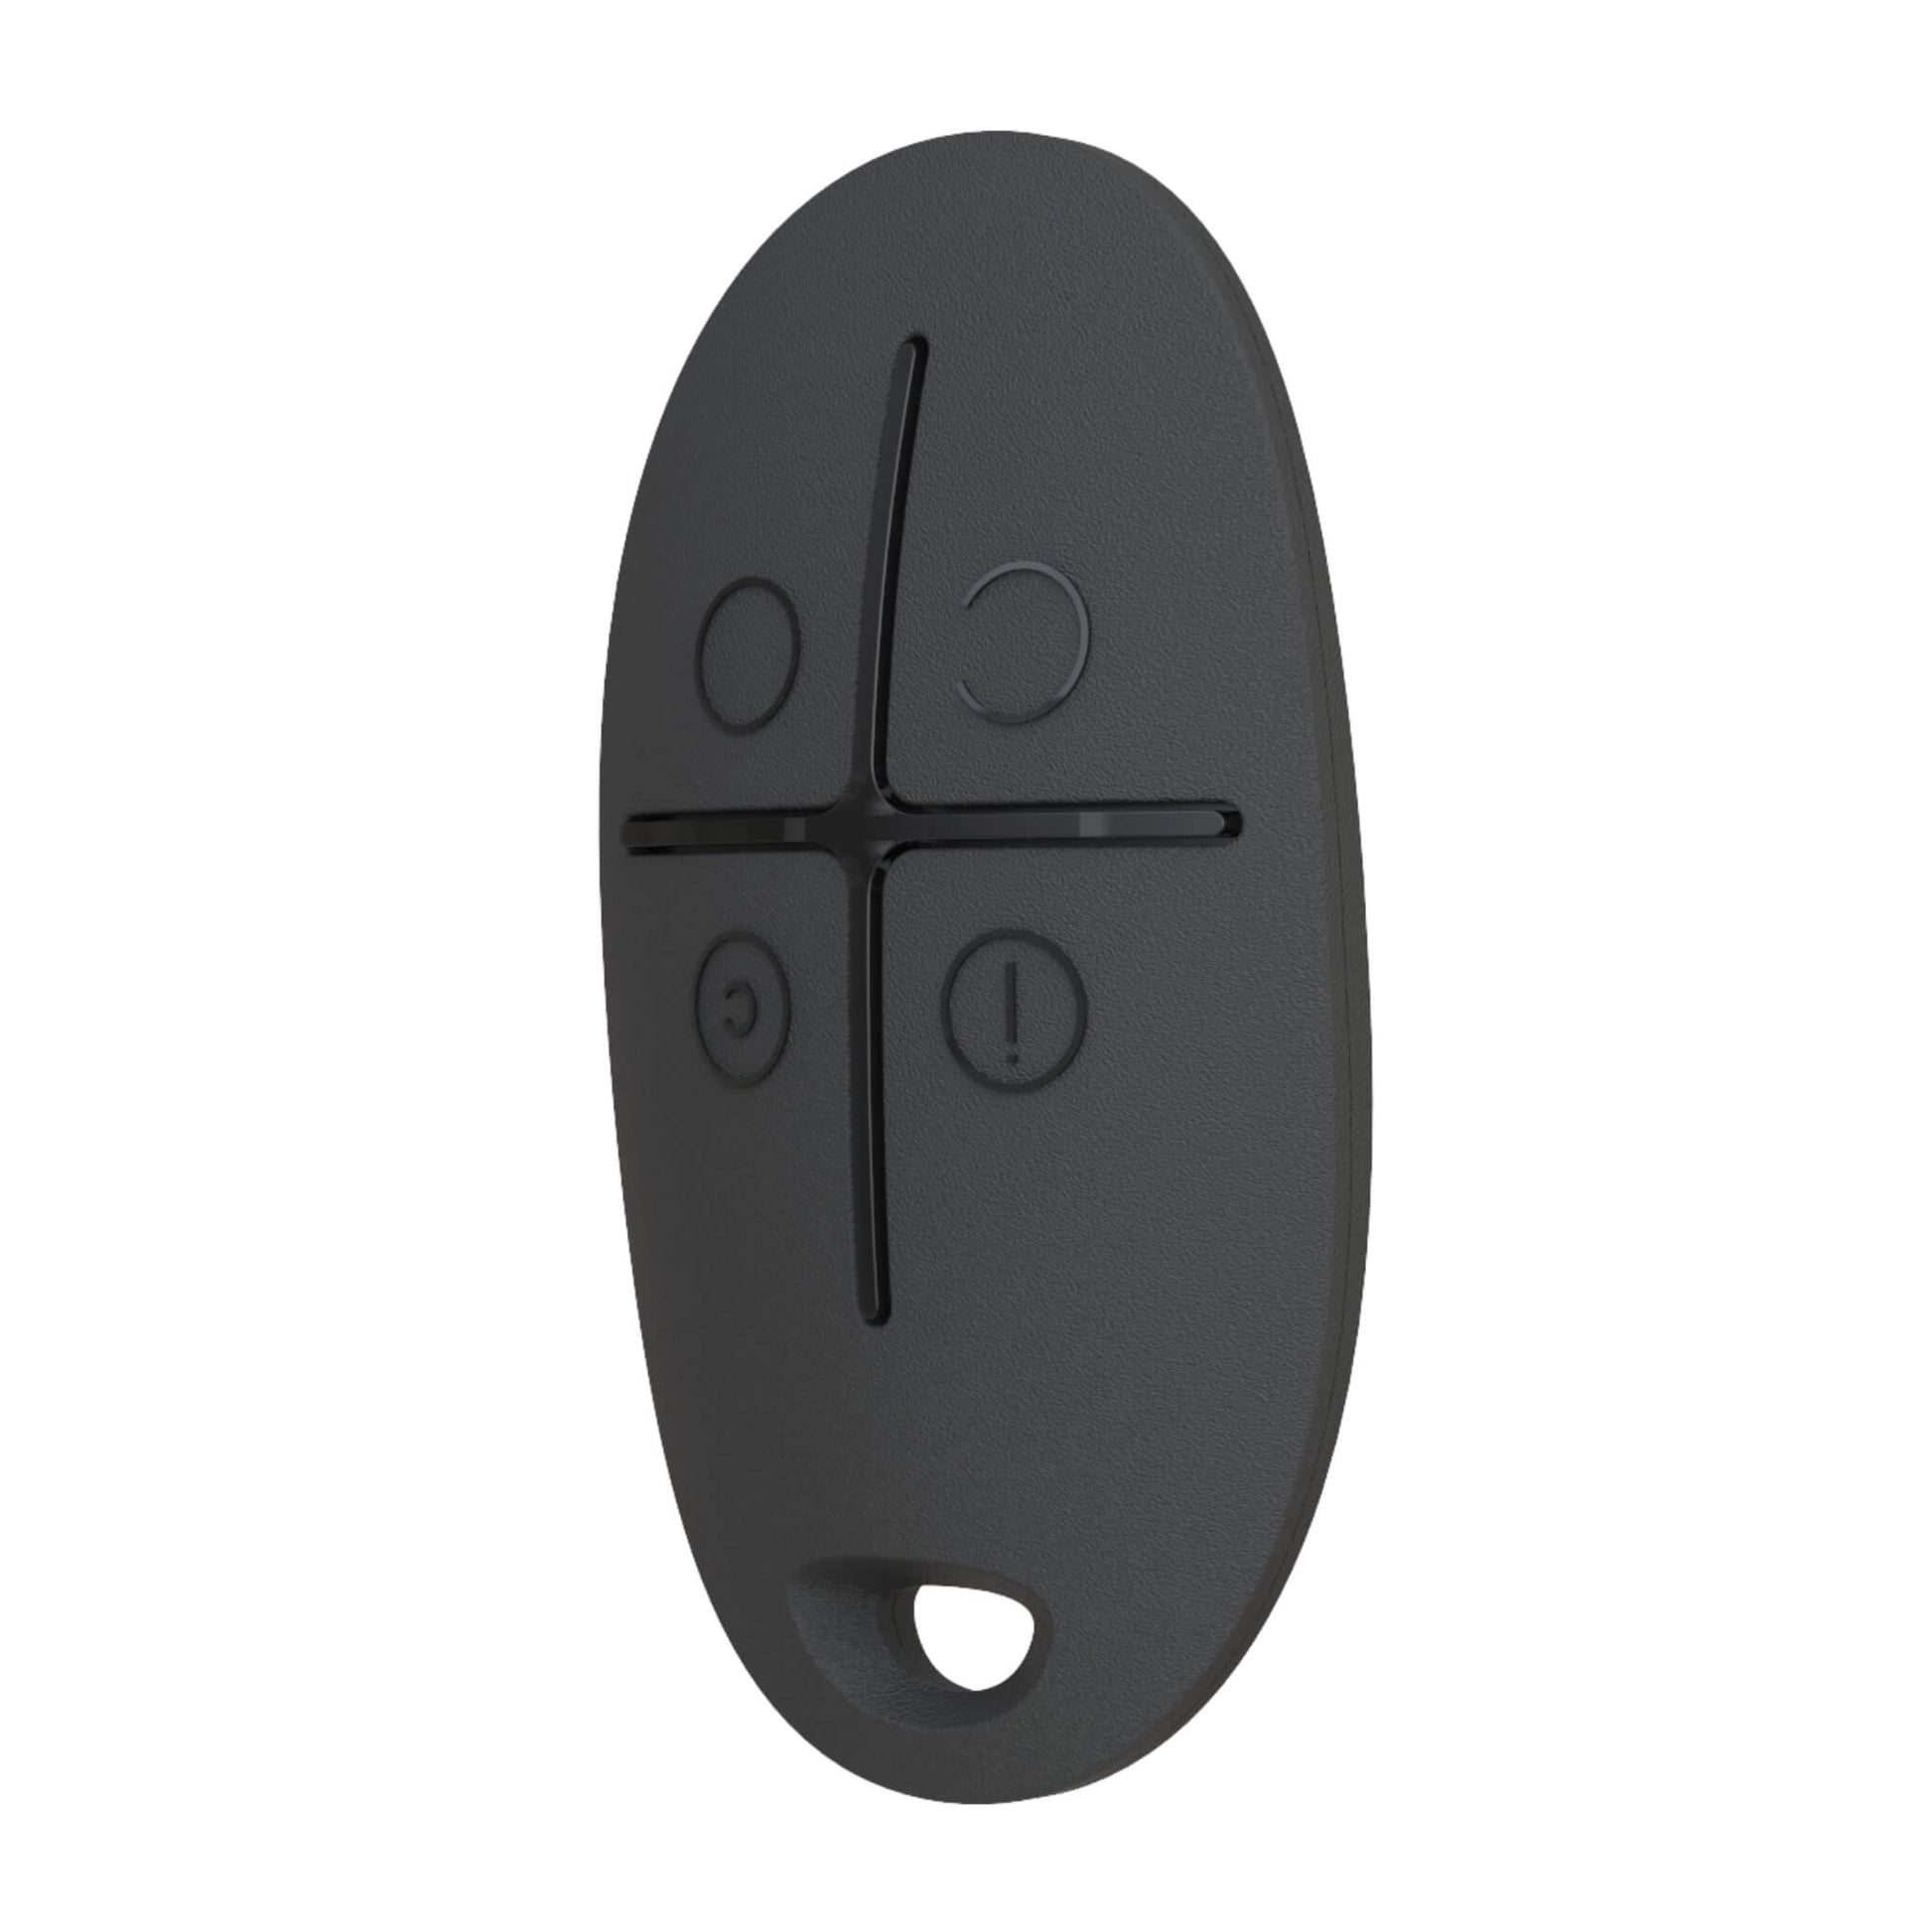 Black Ajax SpaceControl 4 button keyfob for arming and disarming of your Ajax Security System for business and home and security , 65 × 37 × 10 mm in size, 13 grams in weight, Side View of Device, rated IP50